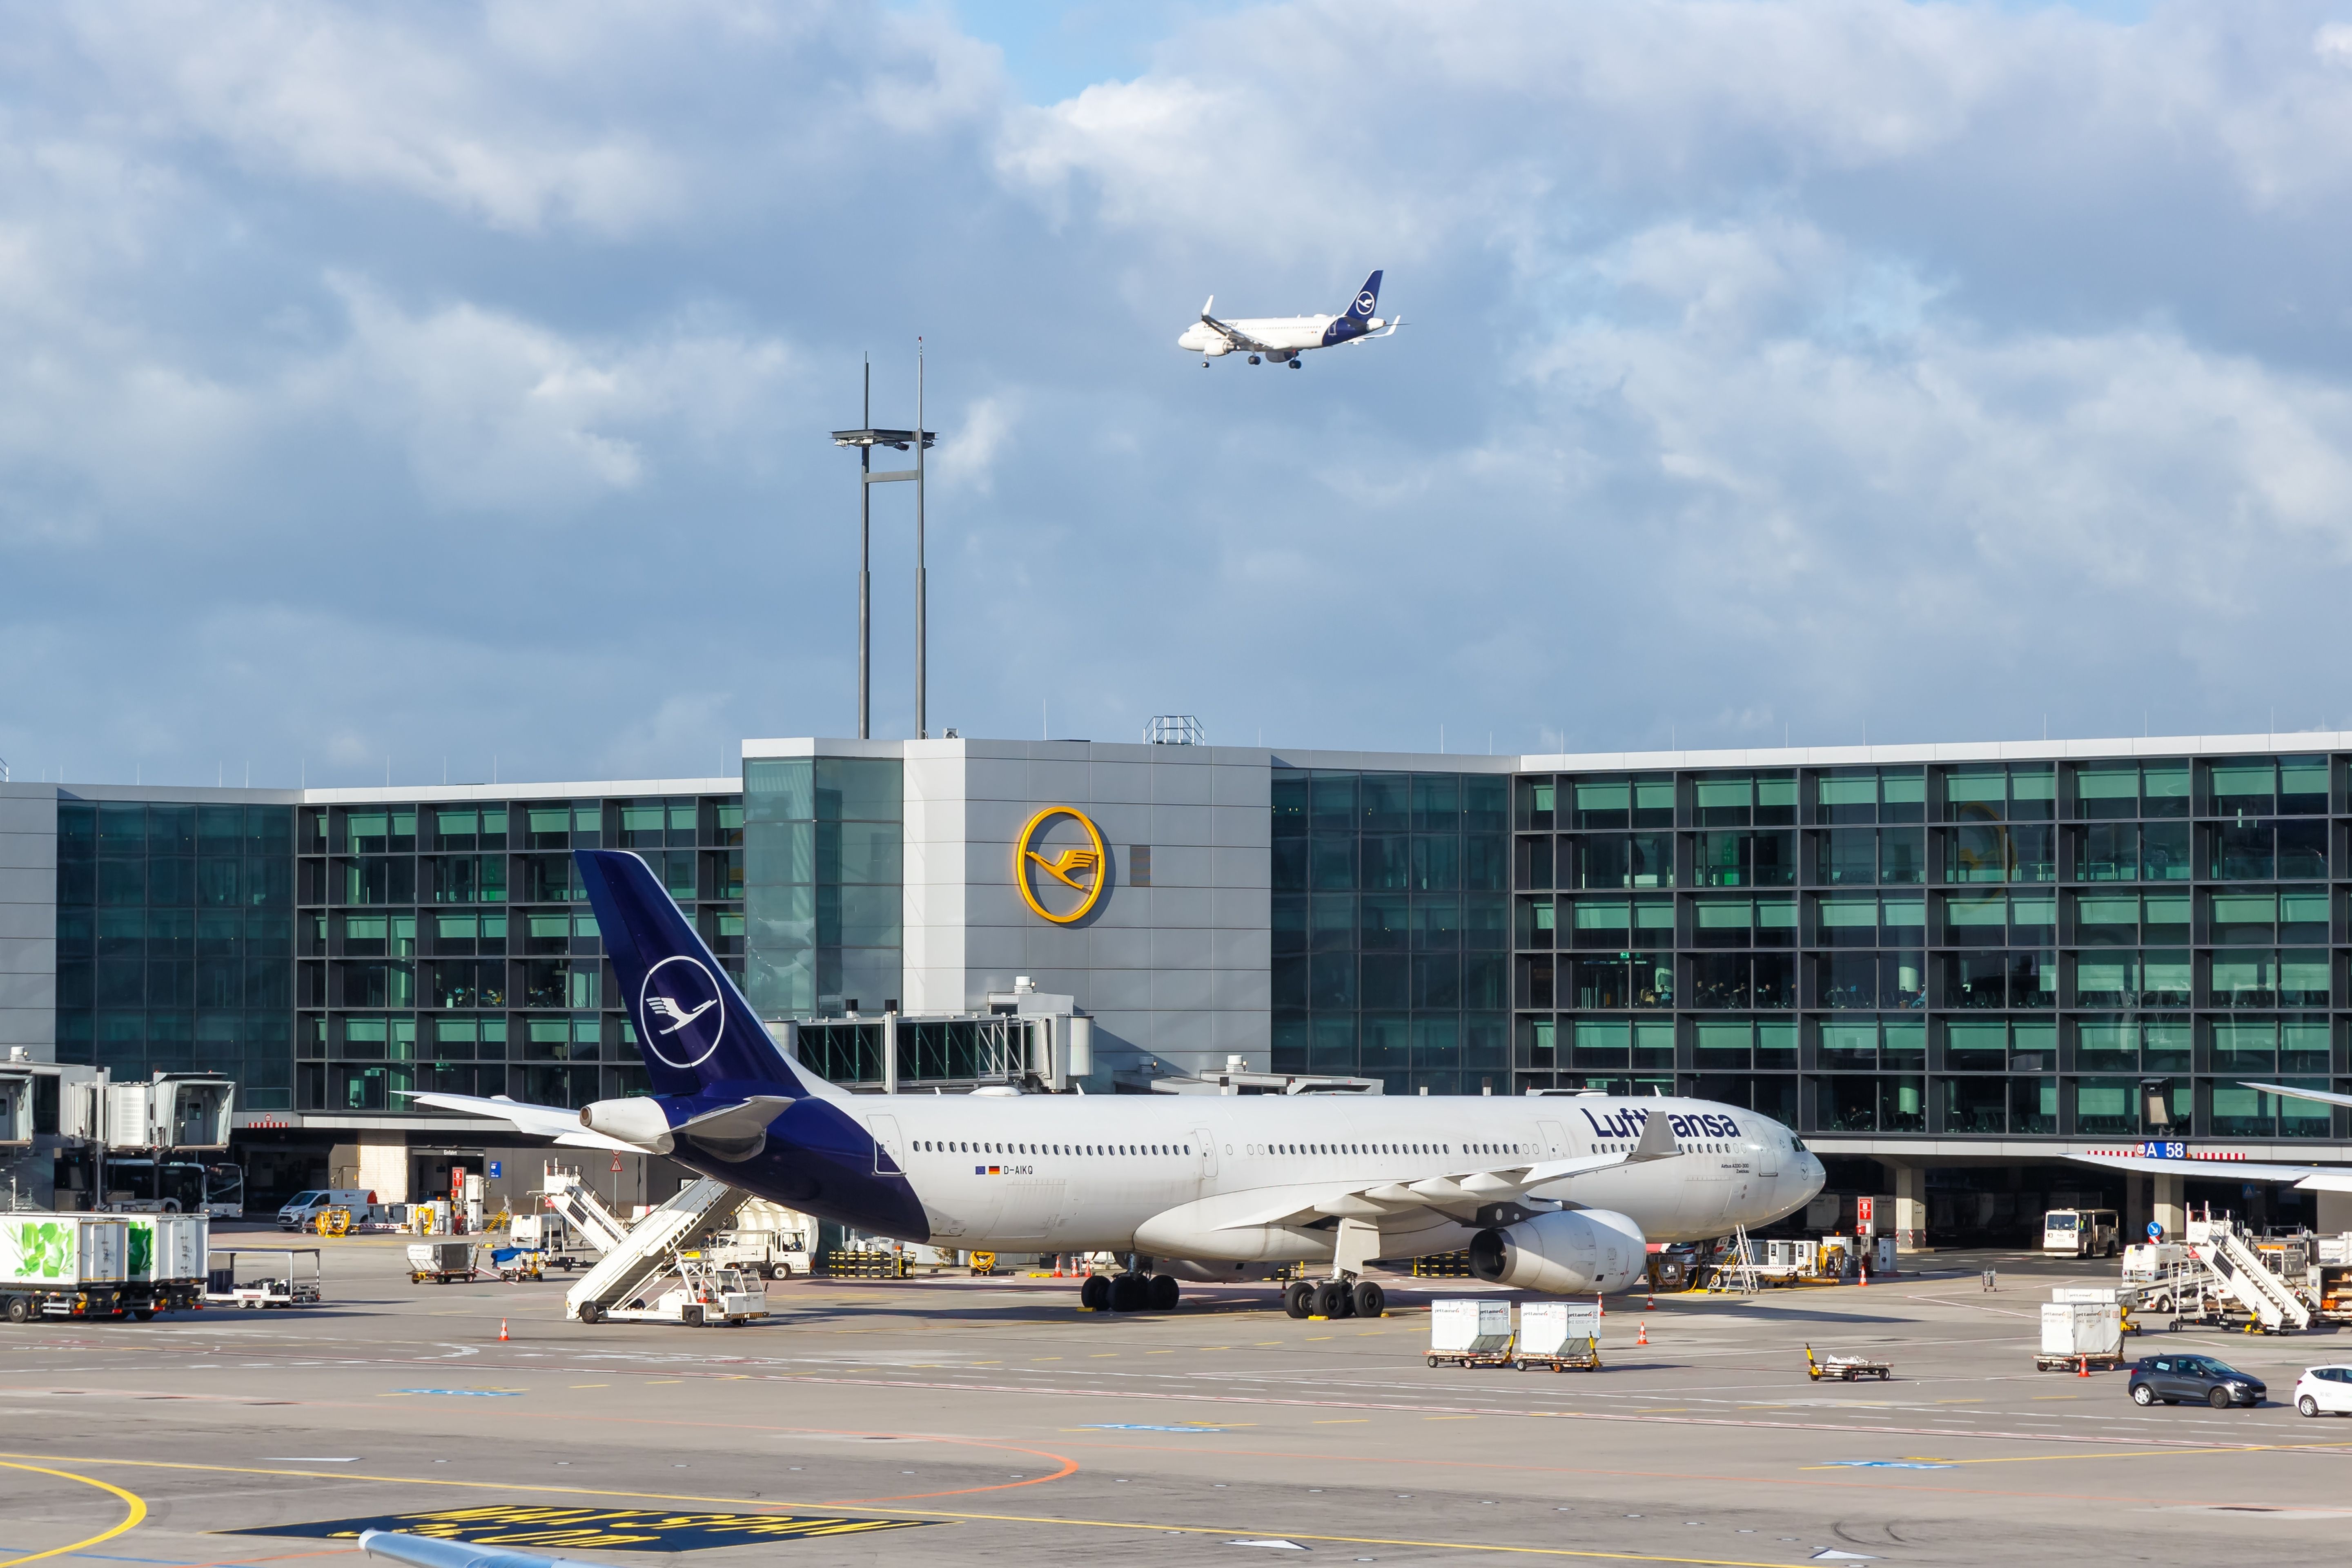 Lufthansa Airbus A330-300 at the gate at Frankfurt Airport FRA shutterstock_2278487147